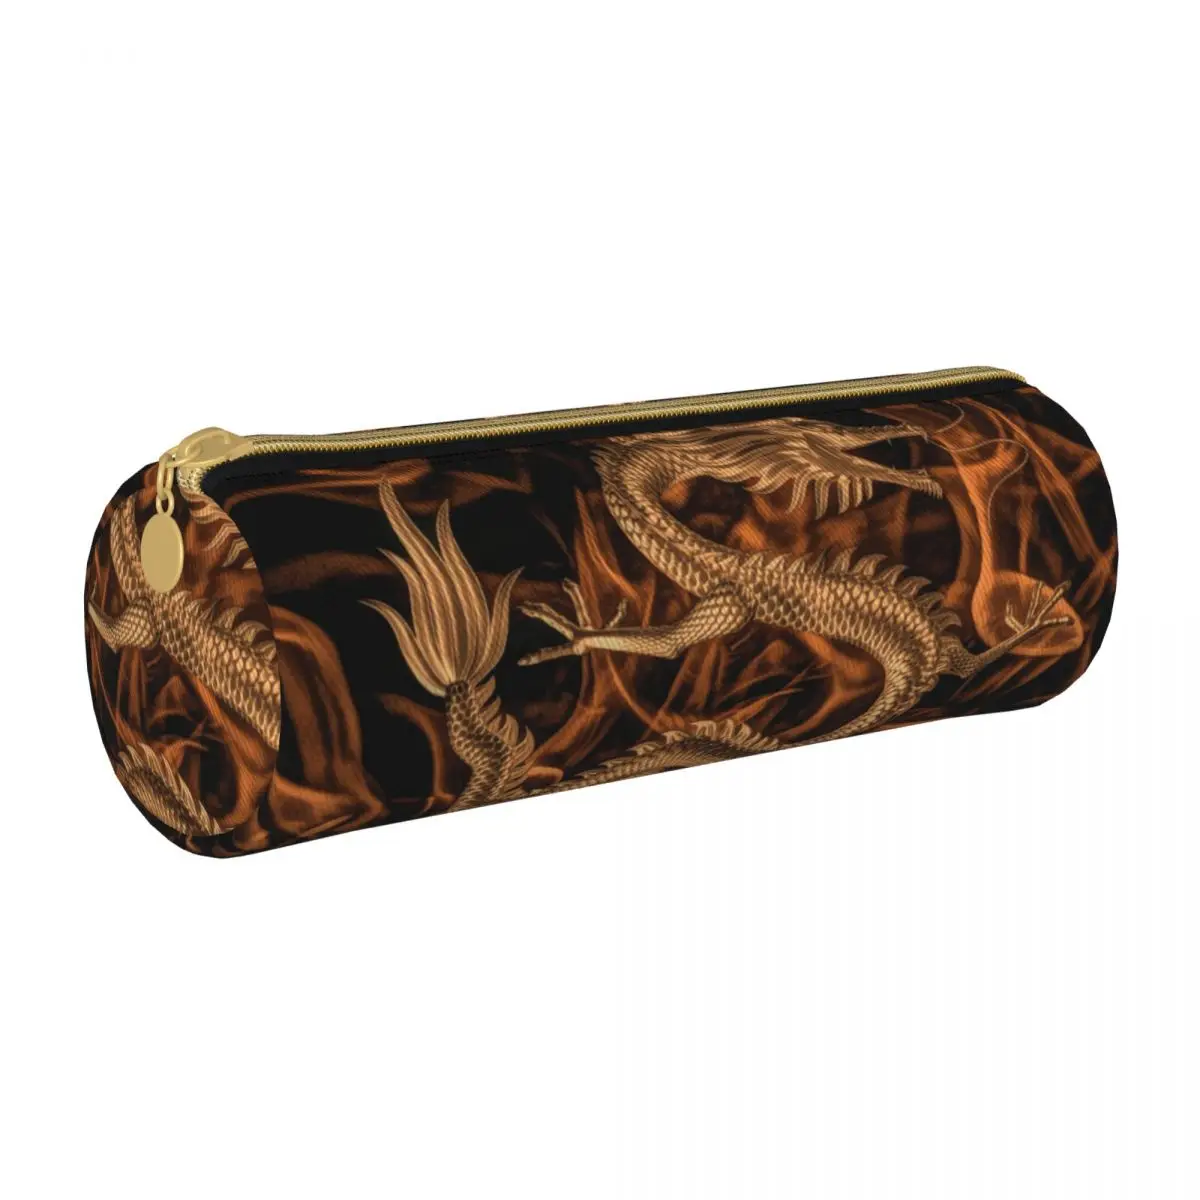 Chinese Dragon Art Round Pencil Case Fire Animal Print Teens College Leather Pencil Box Simple Zipper Pen Bags